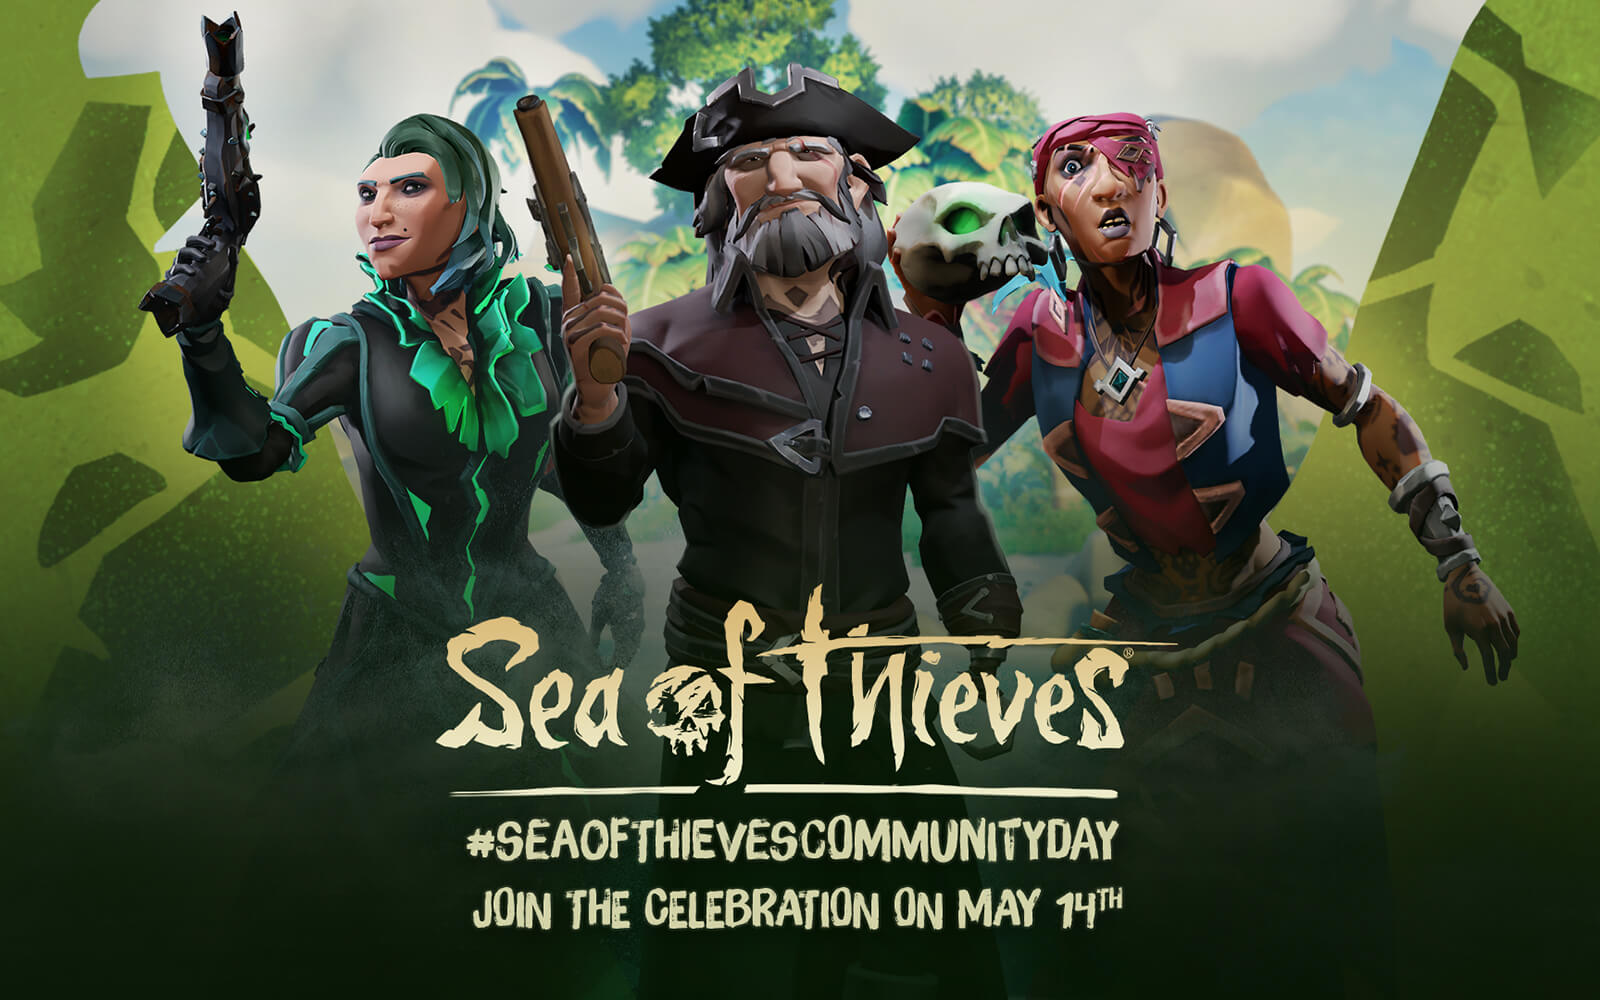 How long is a day in Sea of Thieves